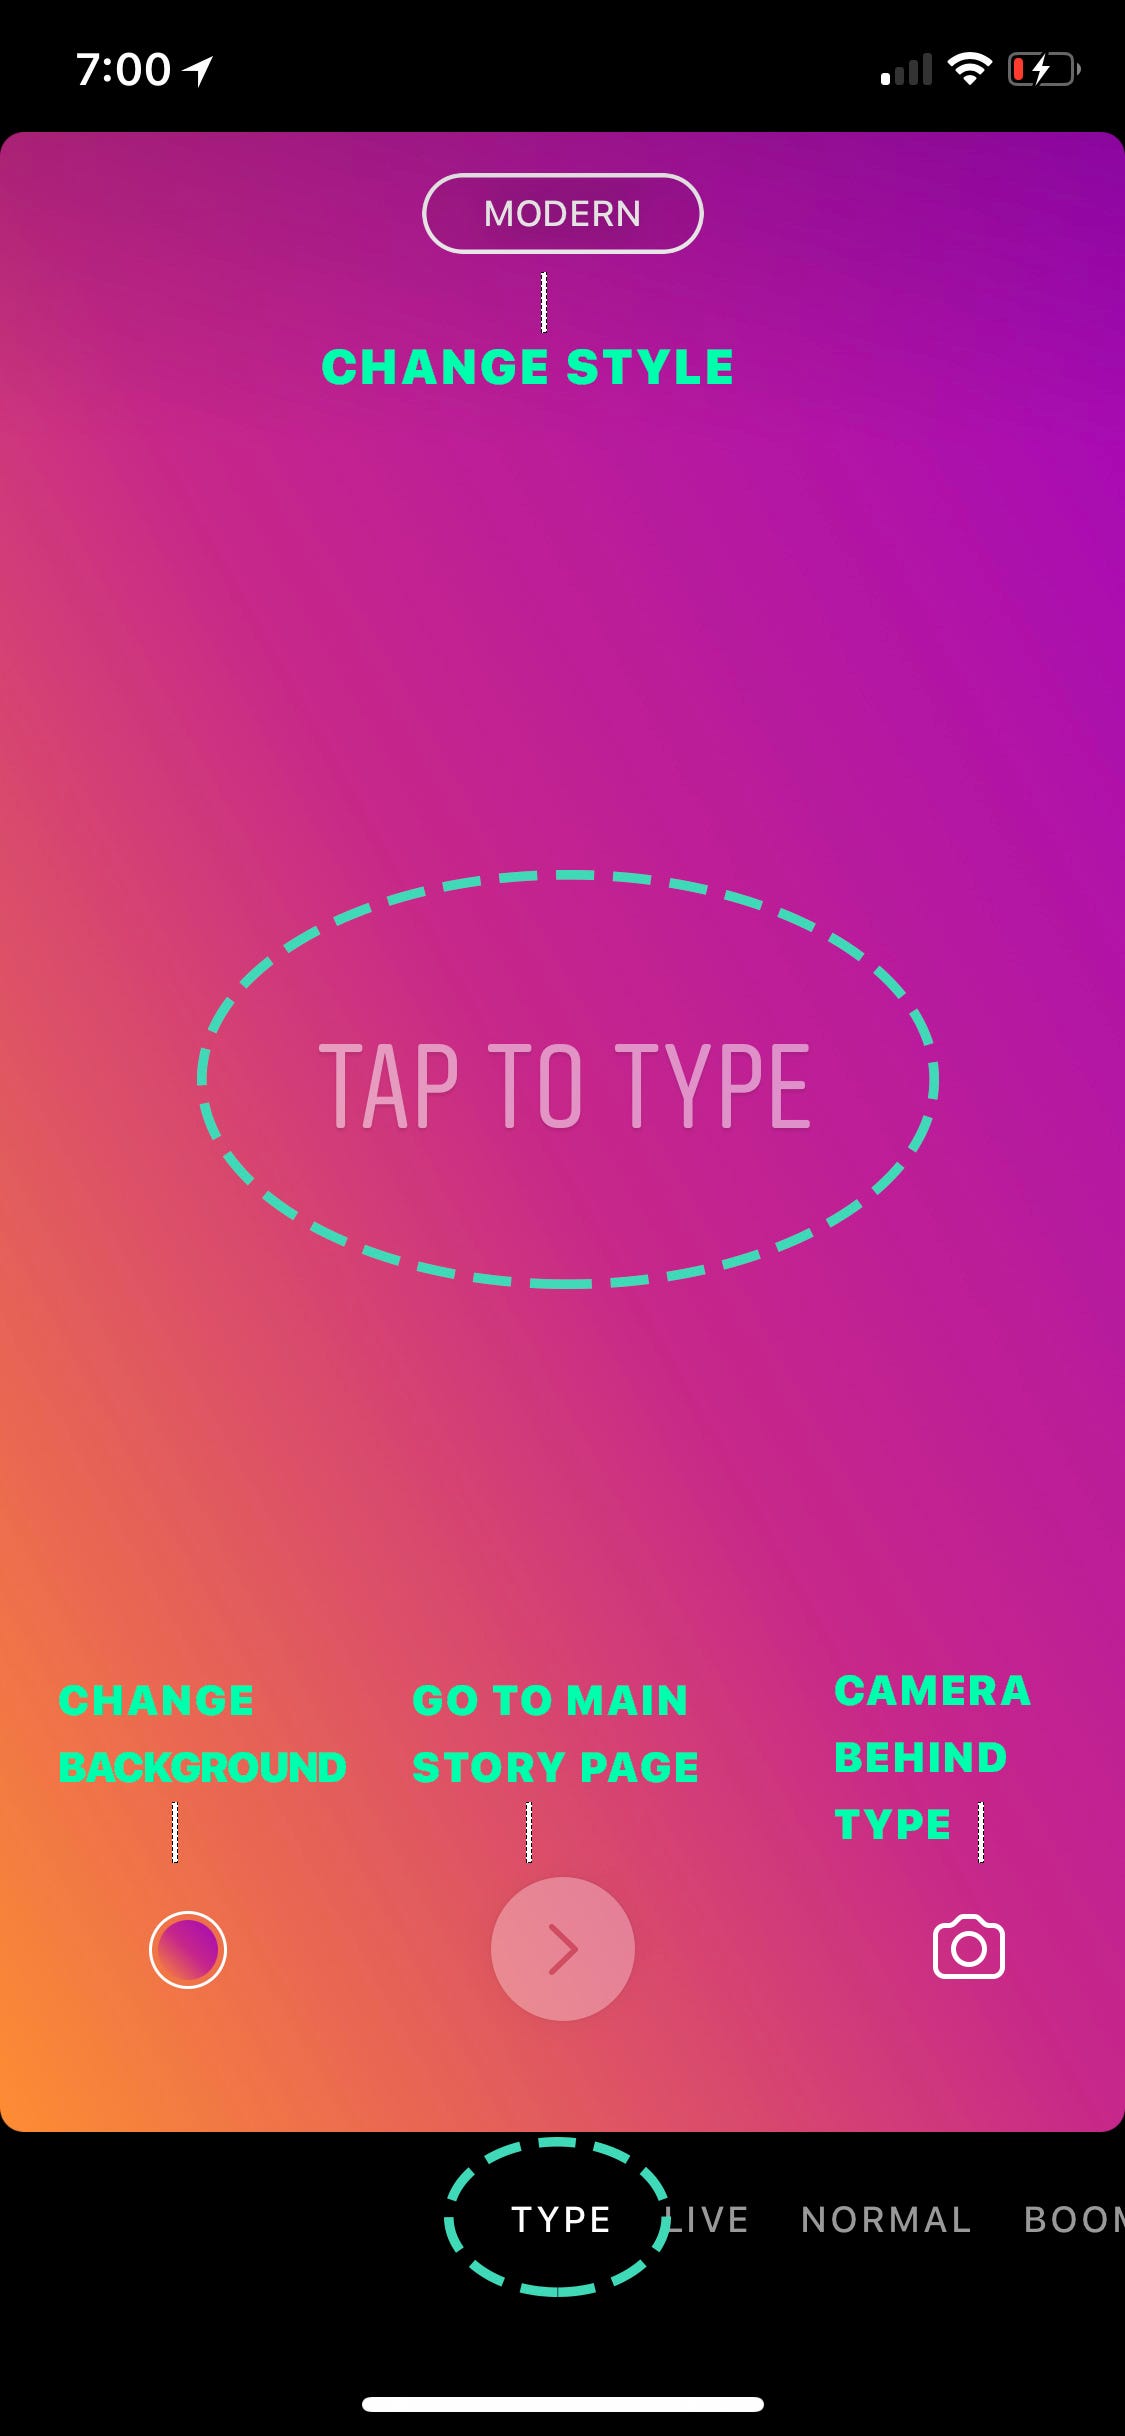 202:Instagram Stories: How to Use Type Mode | by Mike Murphy | Medium